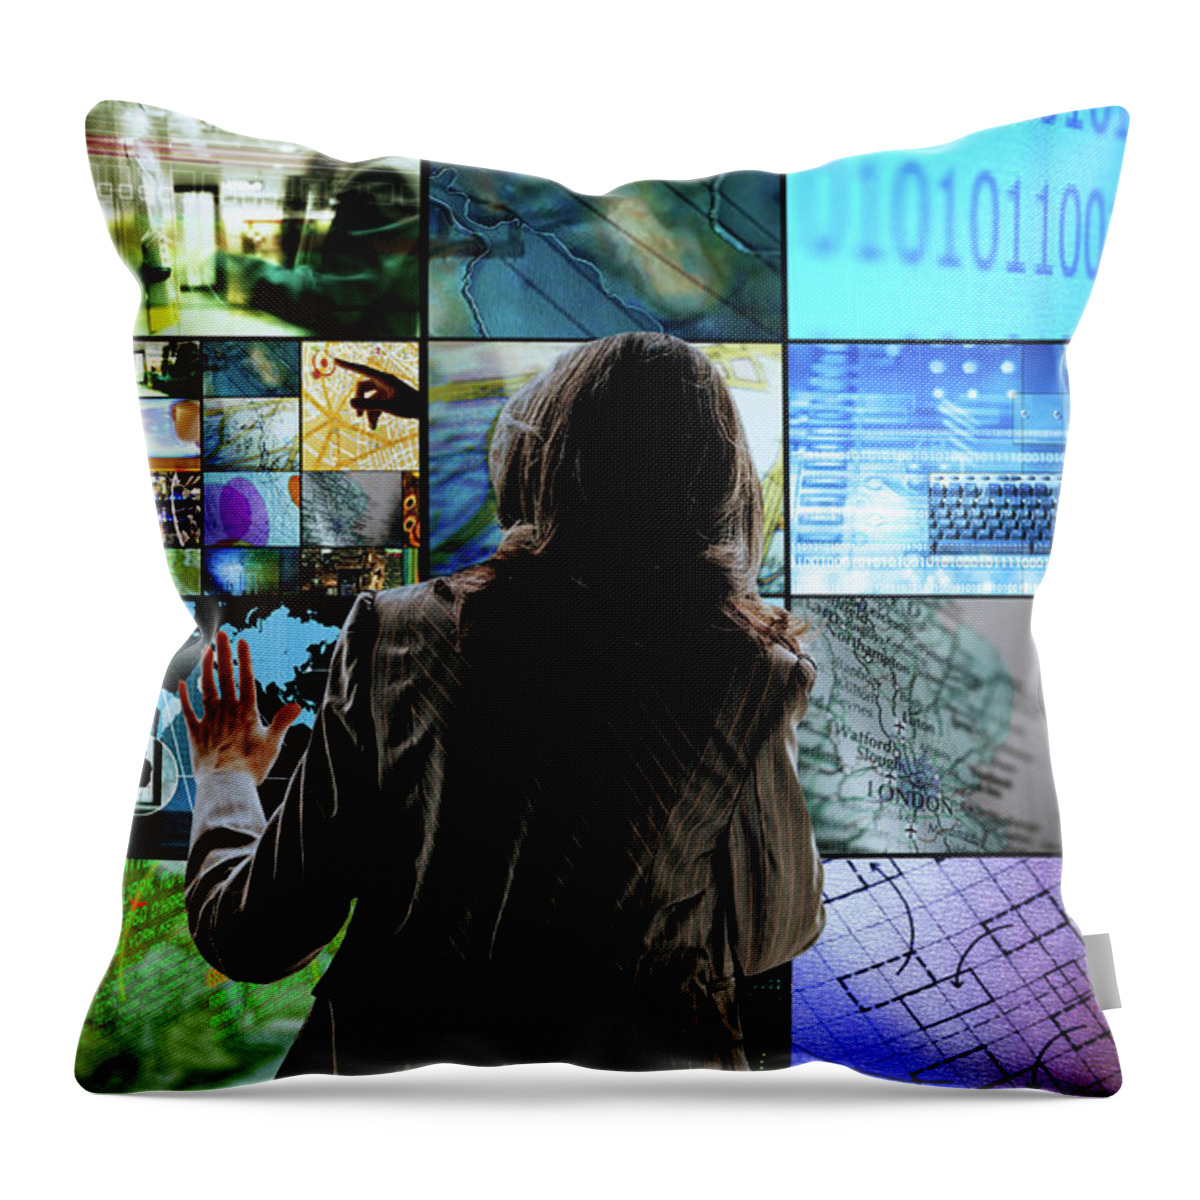 Mature Adult Throw Pillow featuring the photograph Woman Touching Screens by Richard Newstead